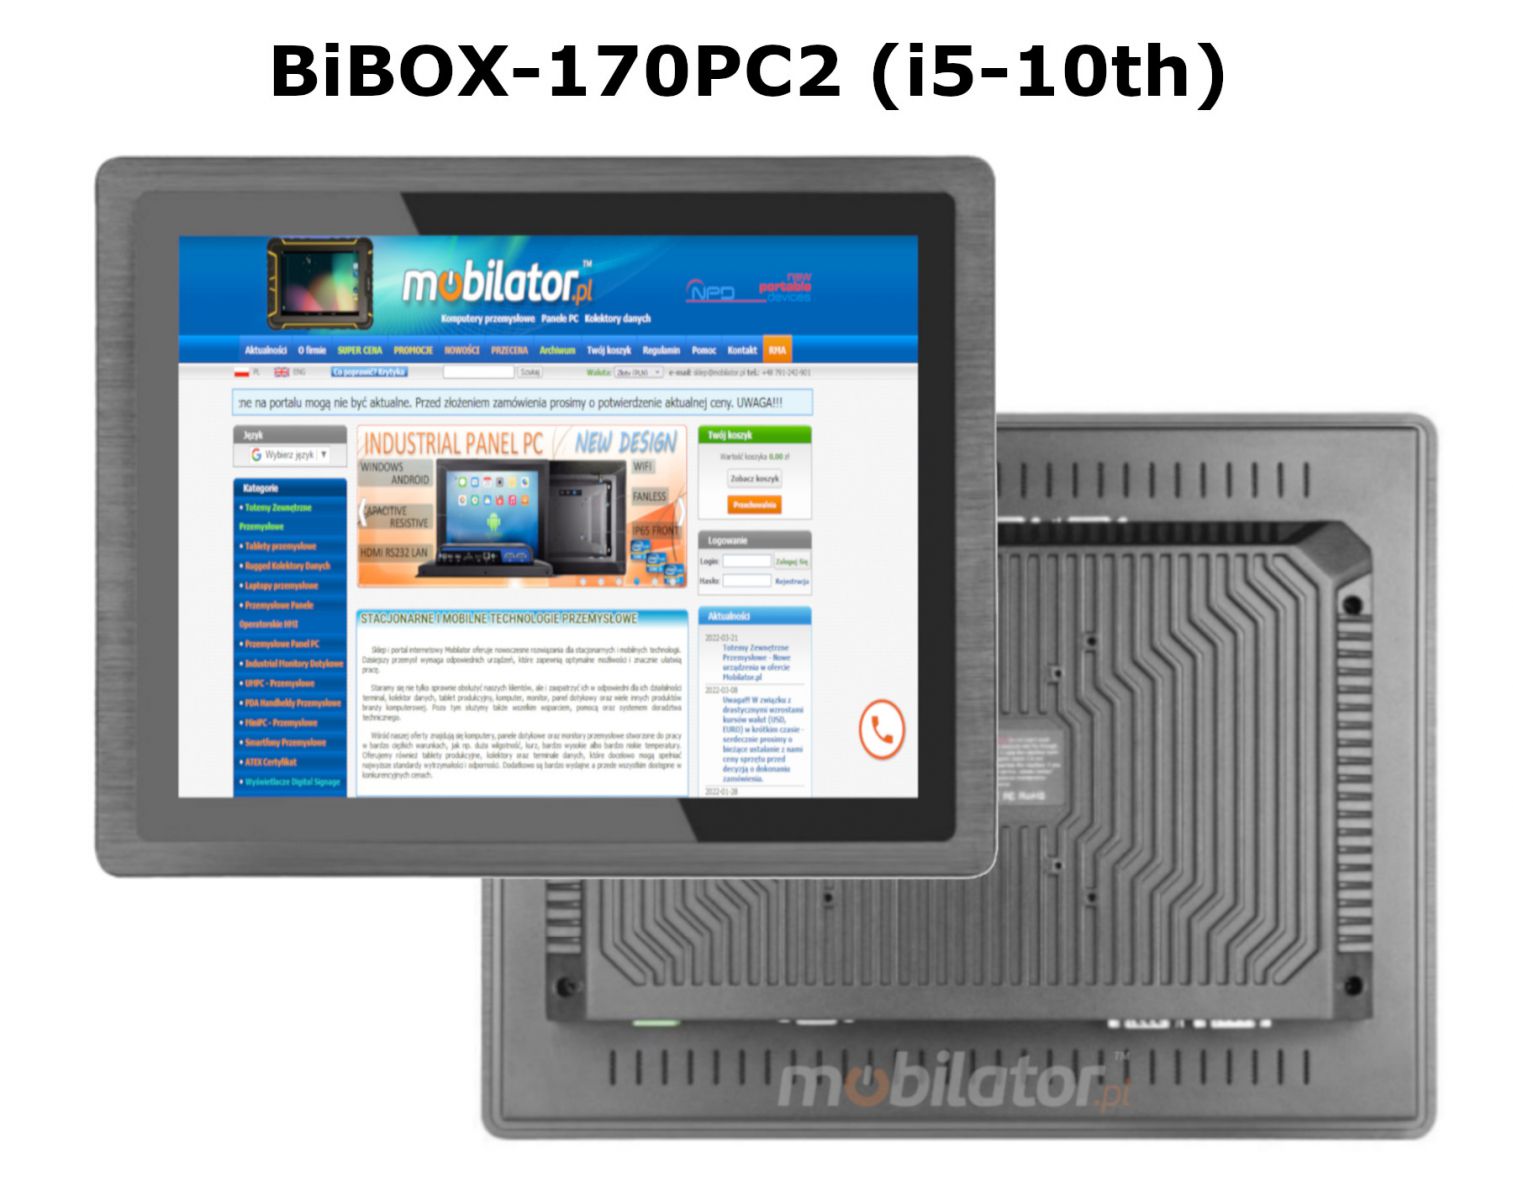 BIBOX-170PC2 rugged and spacious panel computer with WiFi and Bluetooth